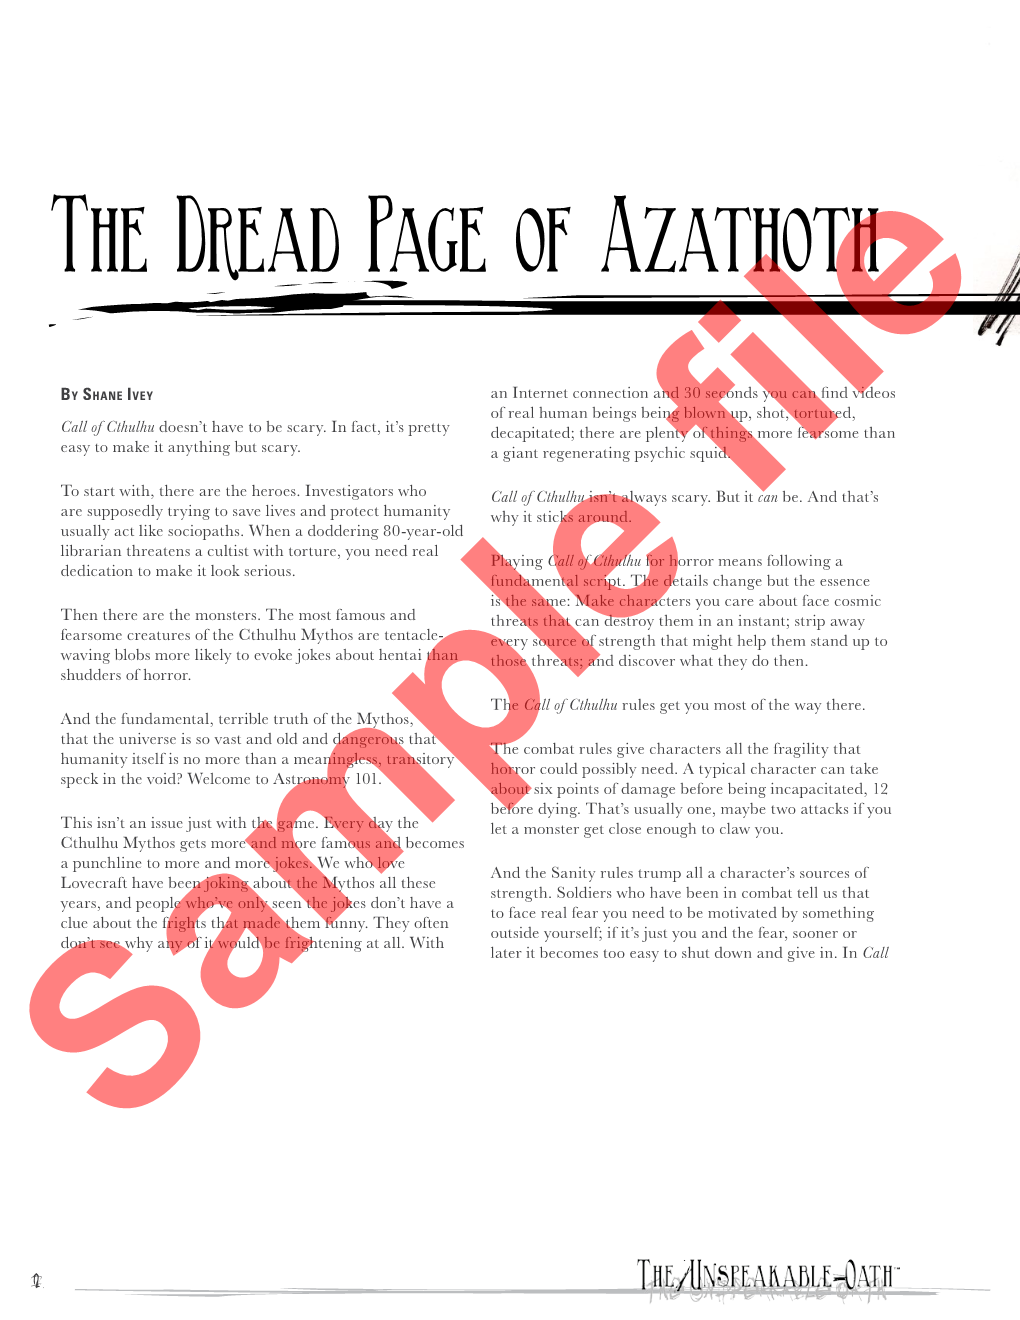 The Dread Page of Azathoth